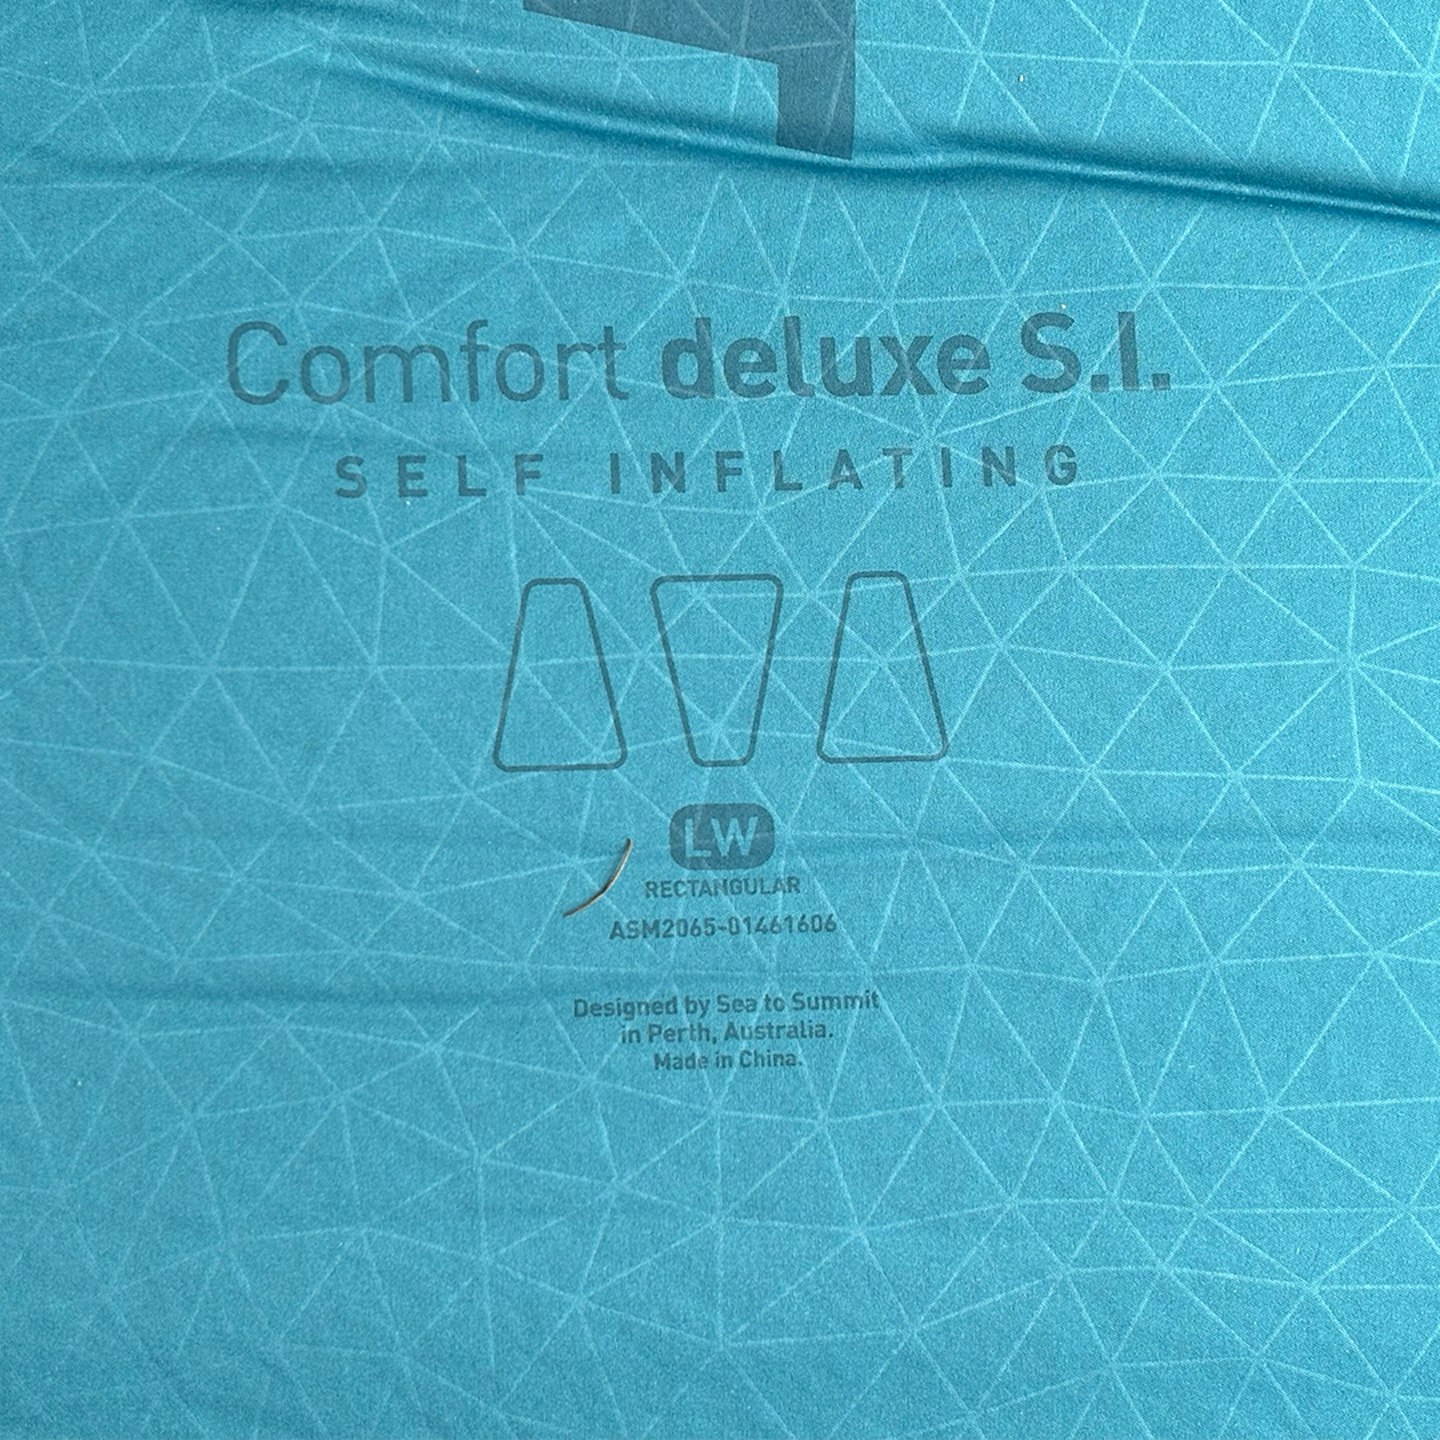 Sea to Summit comfort deluxe self inflating camping mattress logo